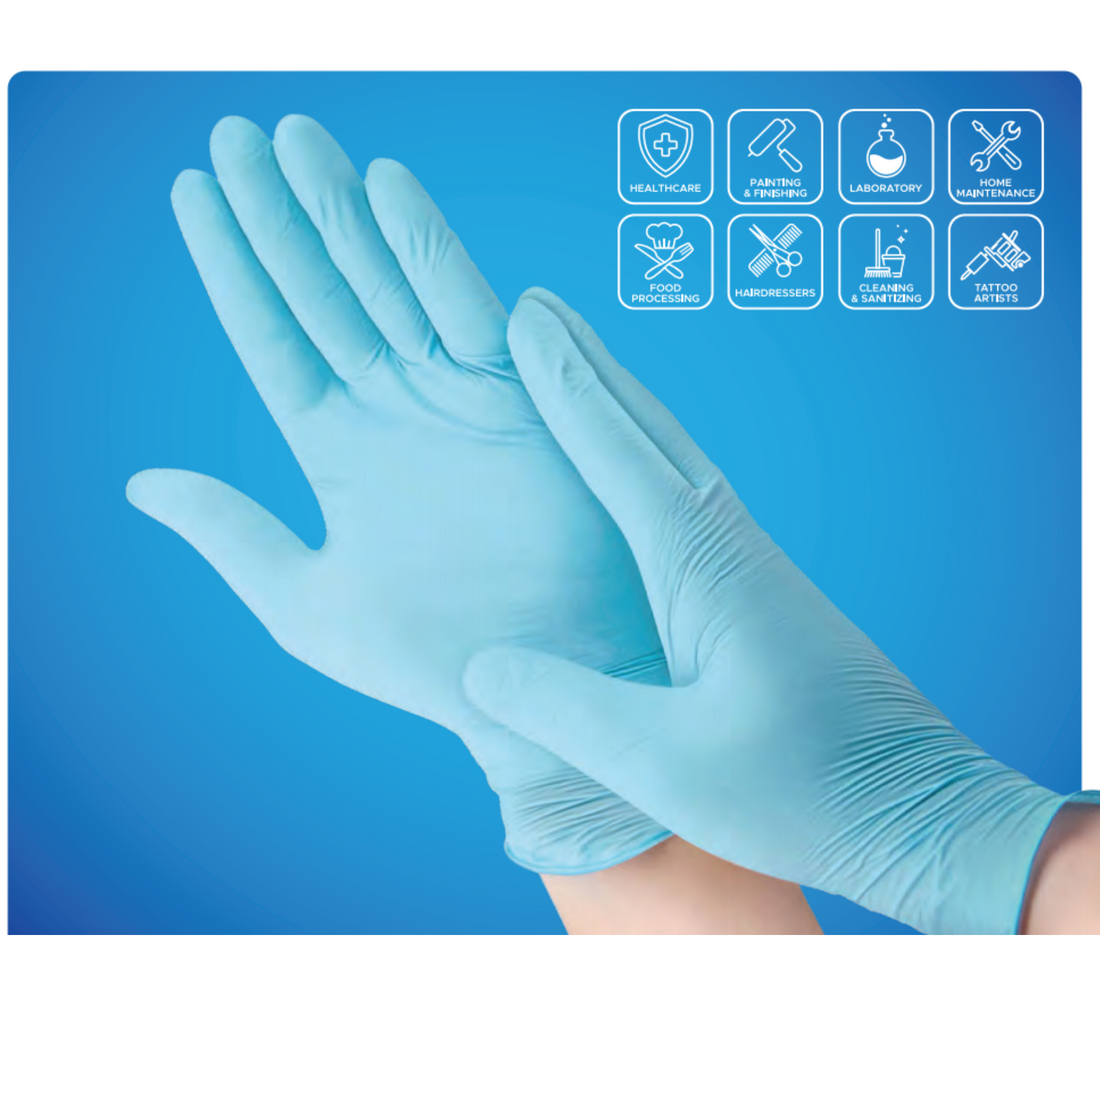 A Buyer's Guide to Choosing Nitrile Gloves